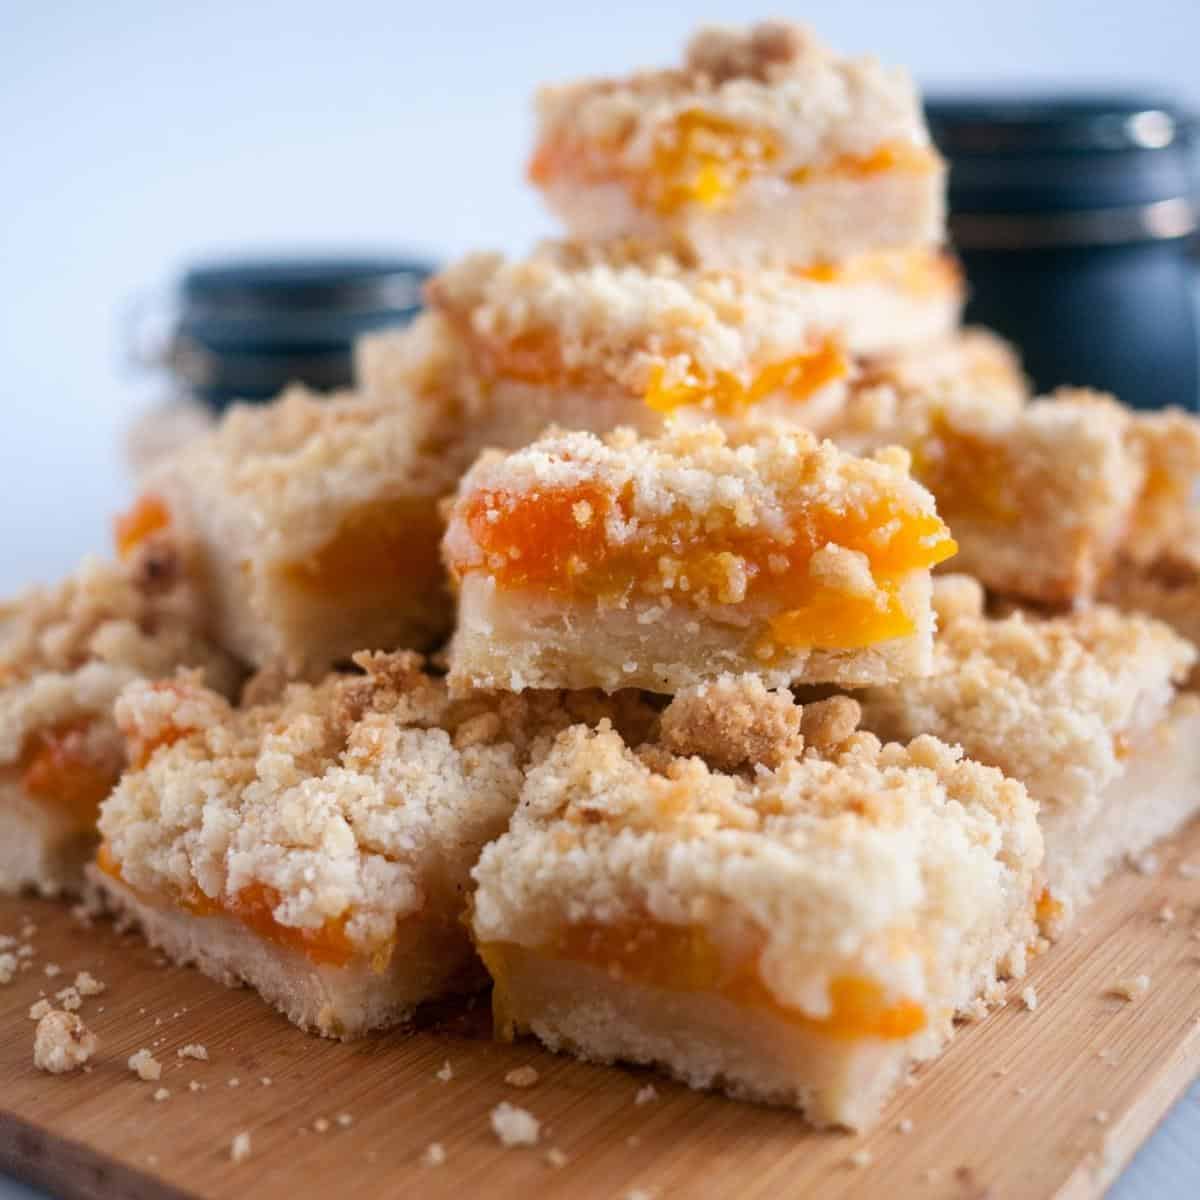 Crumble bars with apricot on the wooden board.